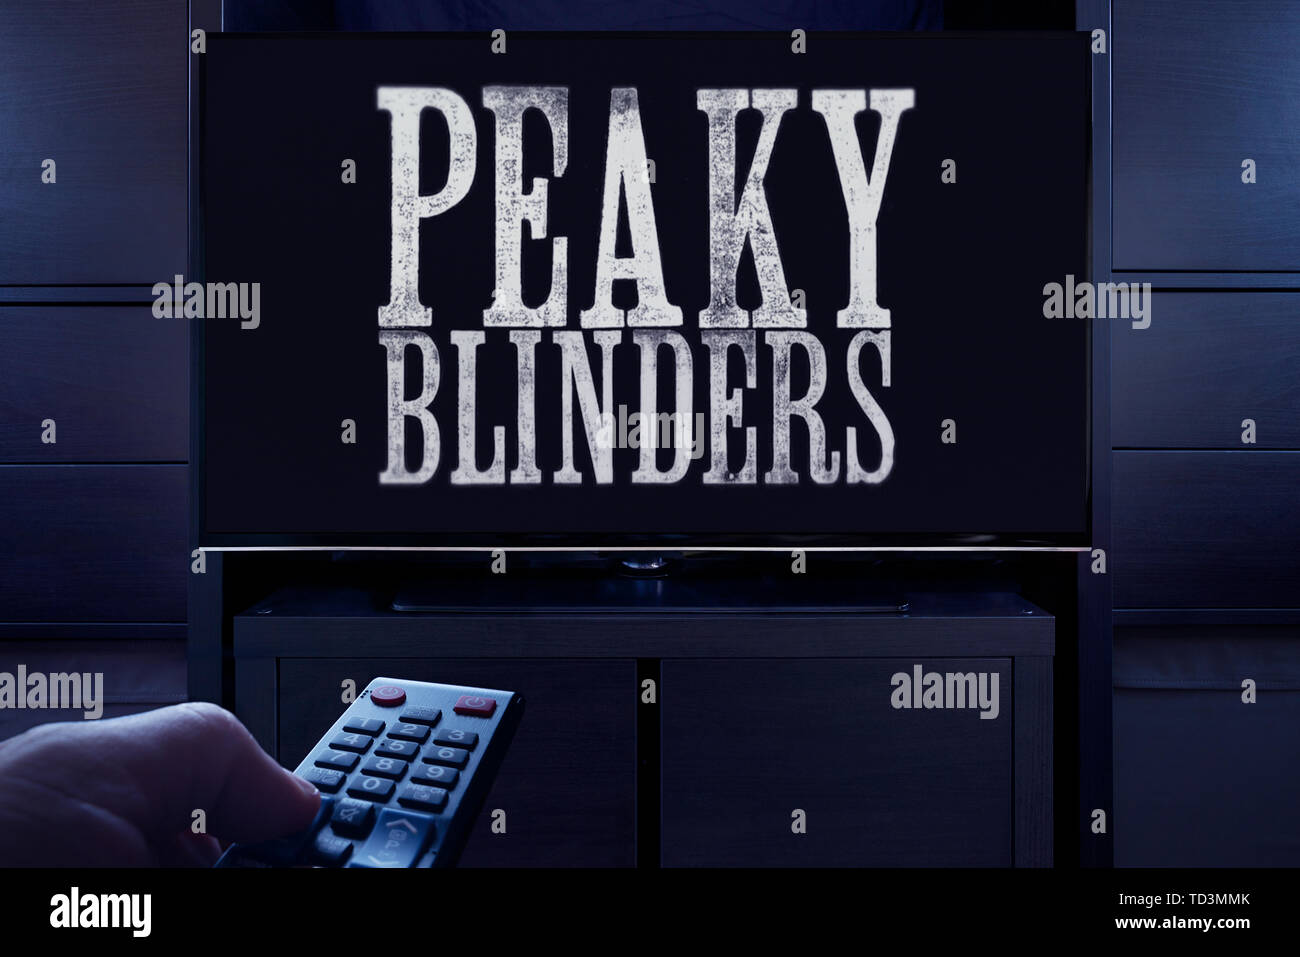 A man points a TV remote at the television which displays the Peaky Blinders main title screen (Editorial use only). Stock Photo